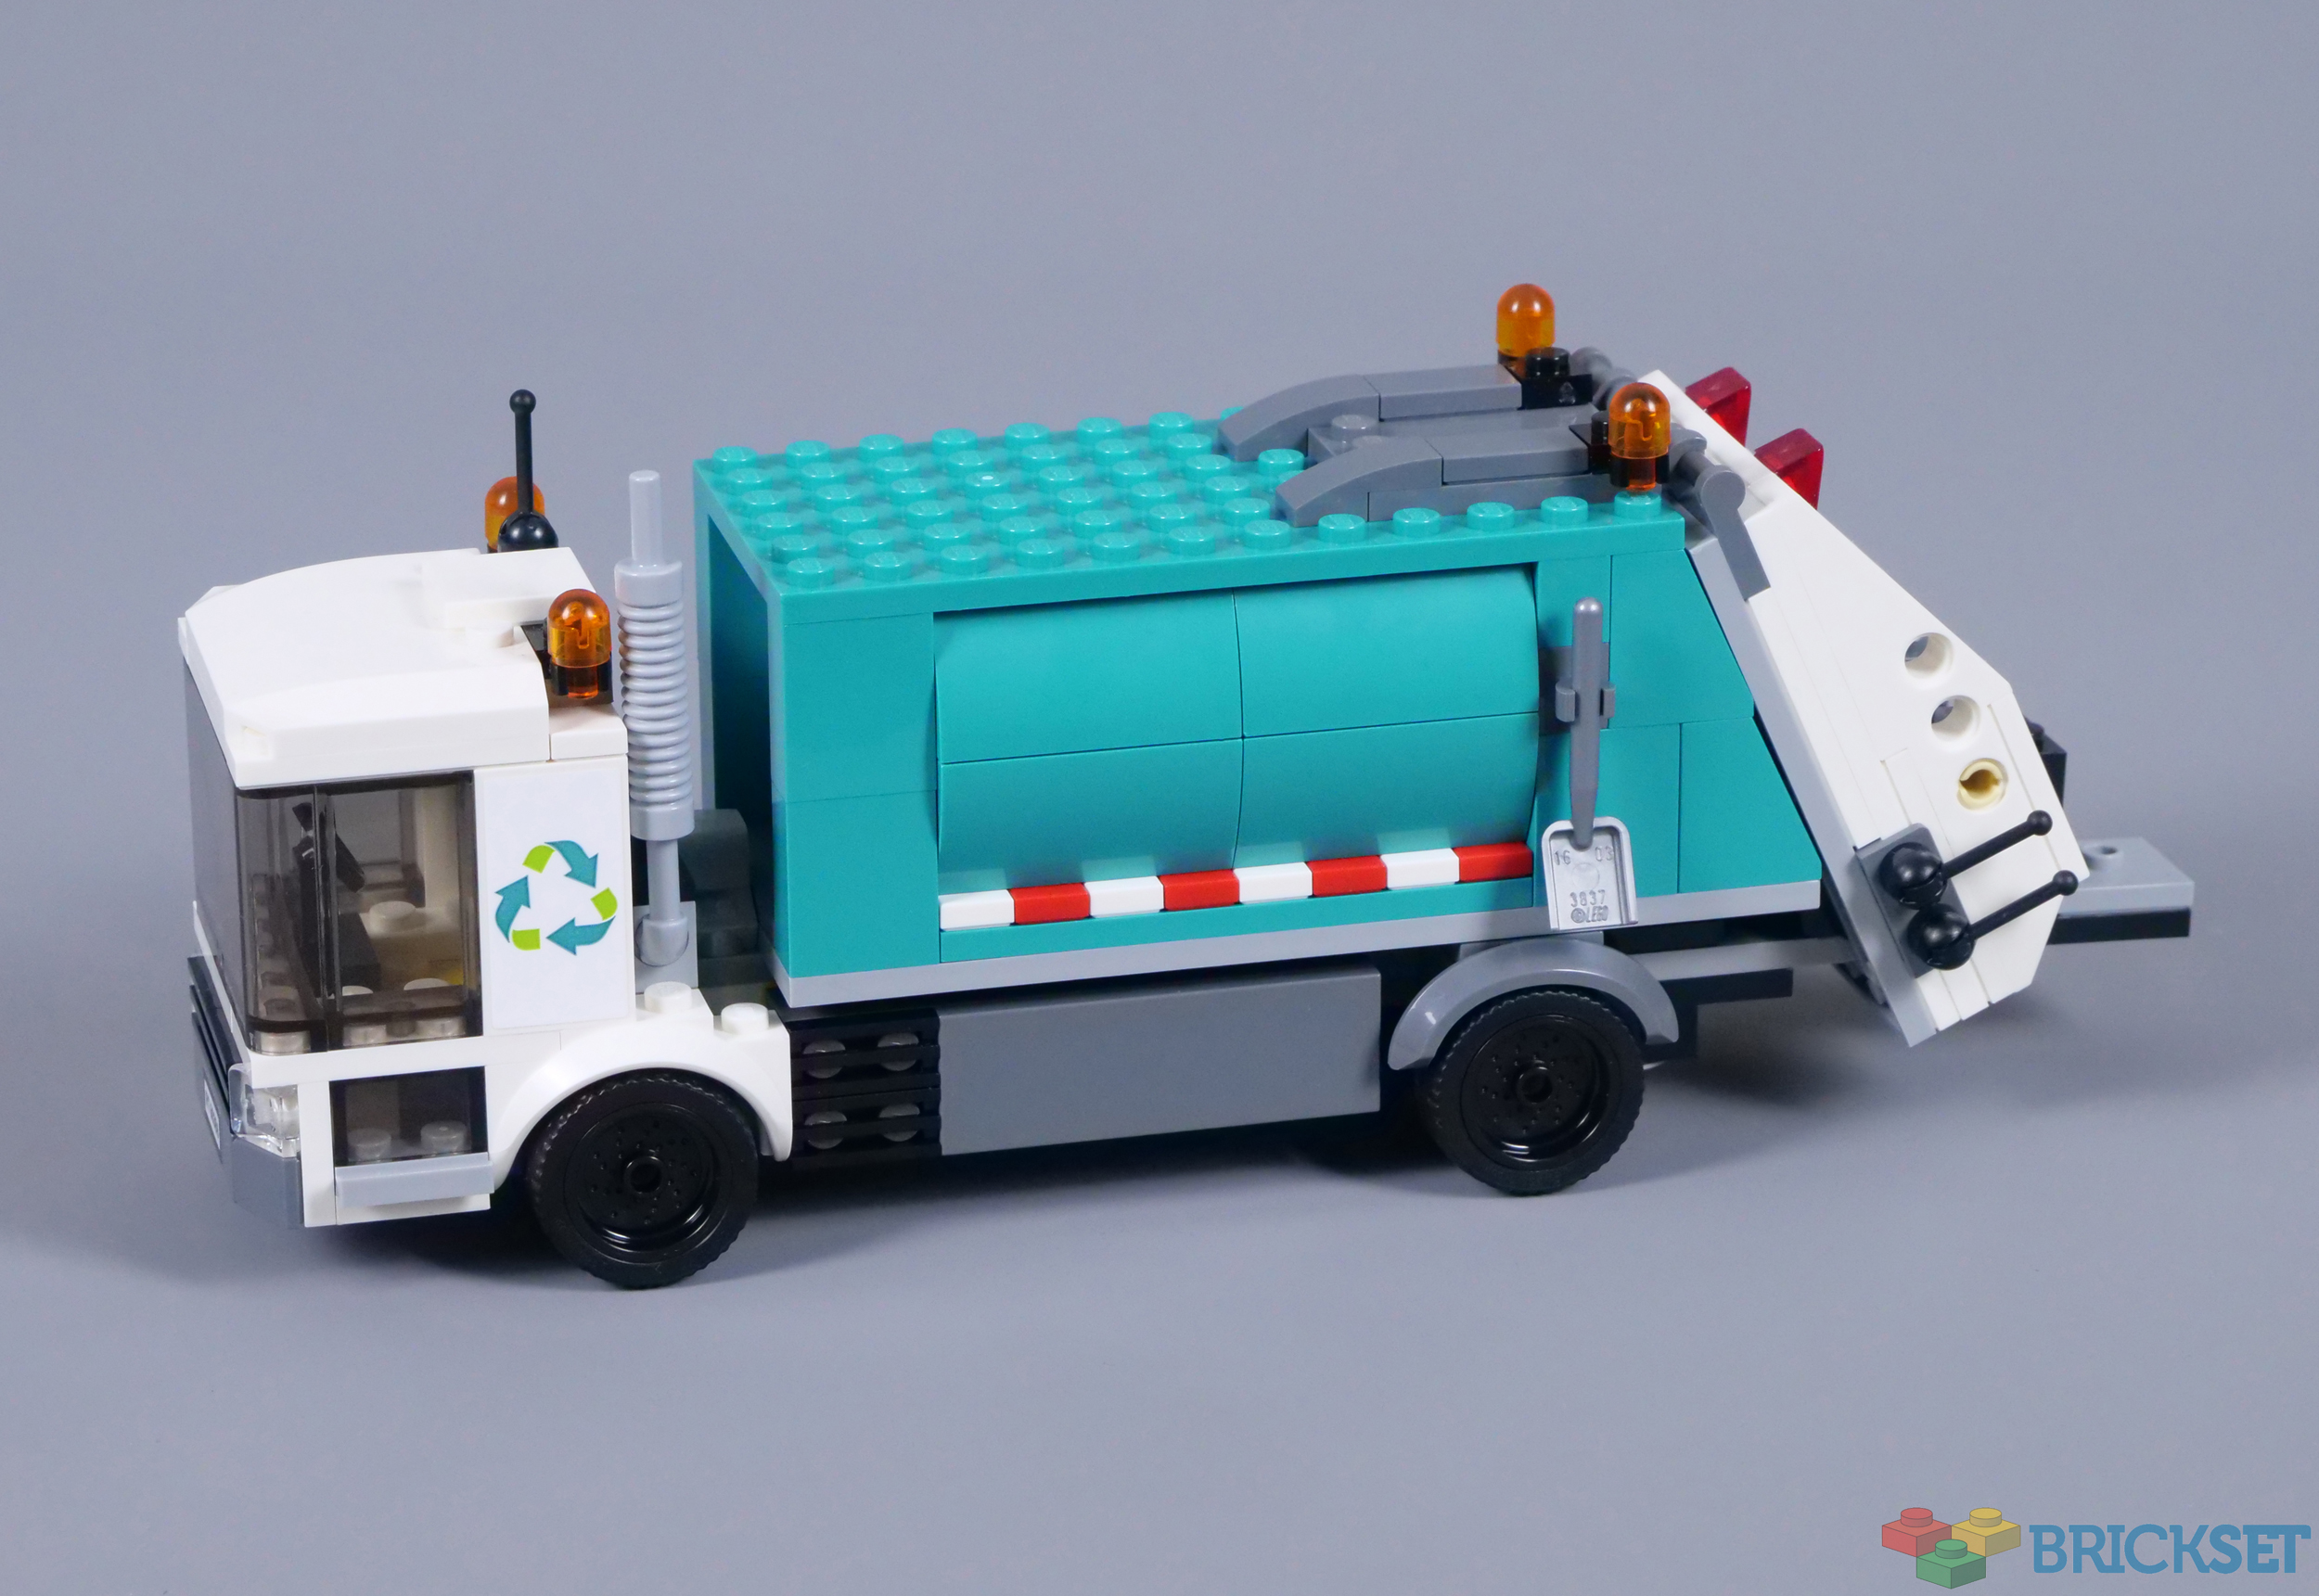 LEGO City 60386 Recycling Truck - LEGO Speed Build Review 